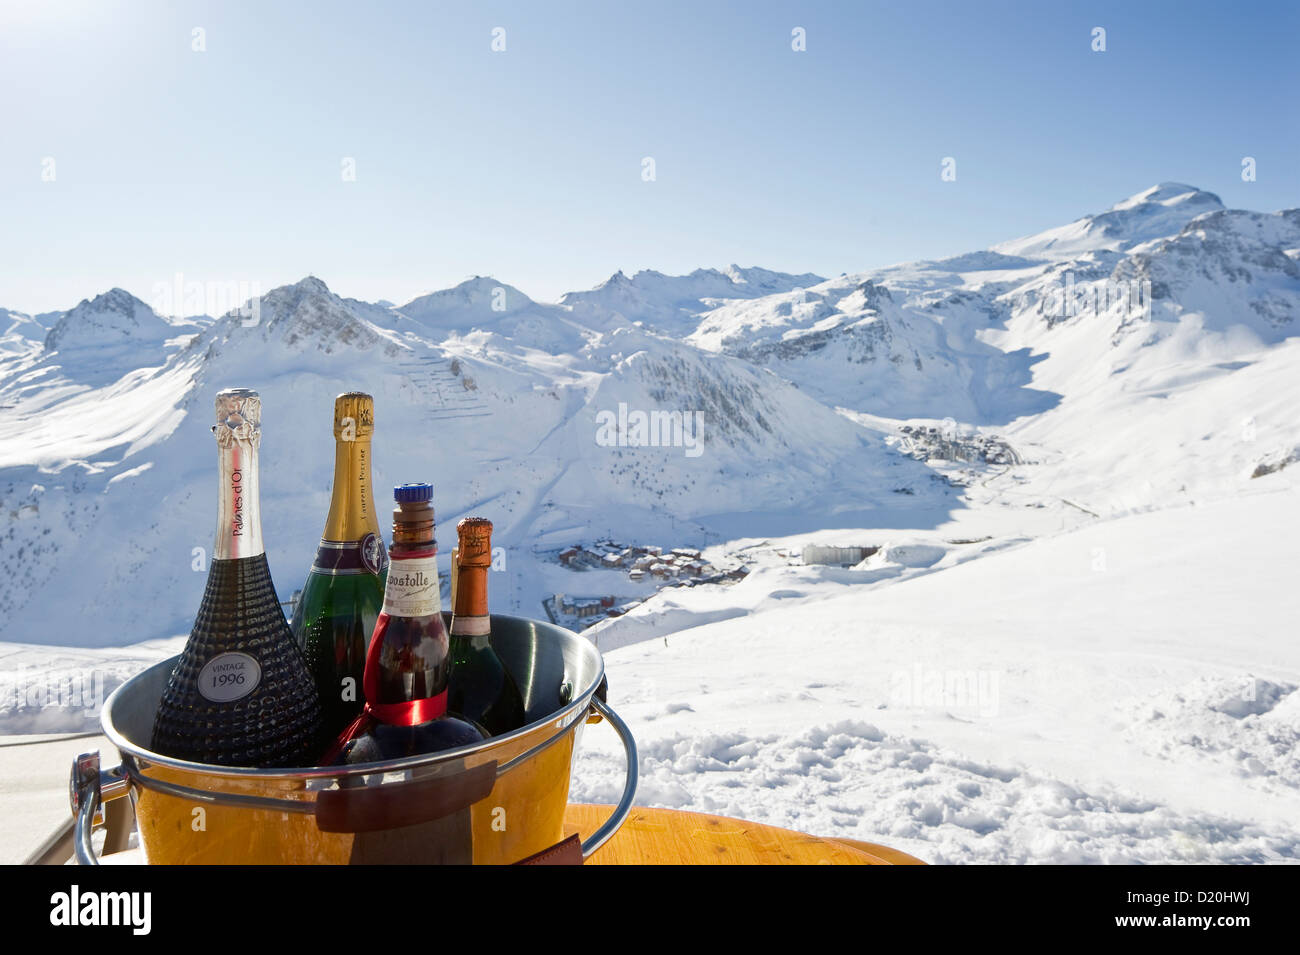 Bottles of champagne in a cooler, Snow-capped mountains in the background, Tignes, Val d Isere, Savoie department, Rhone-Alpes, Stock Photo